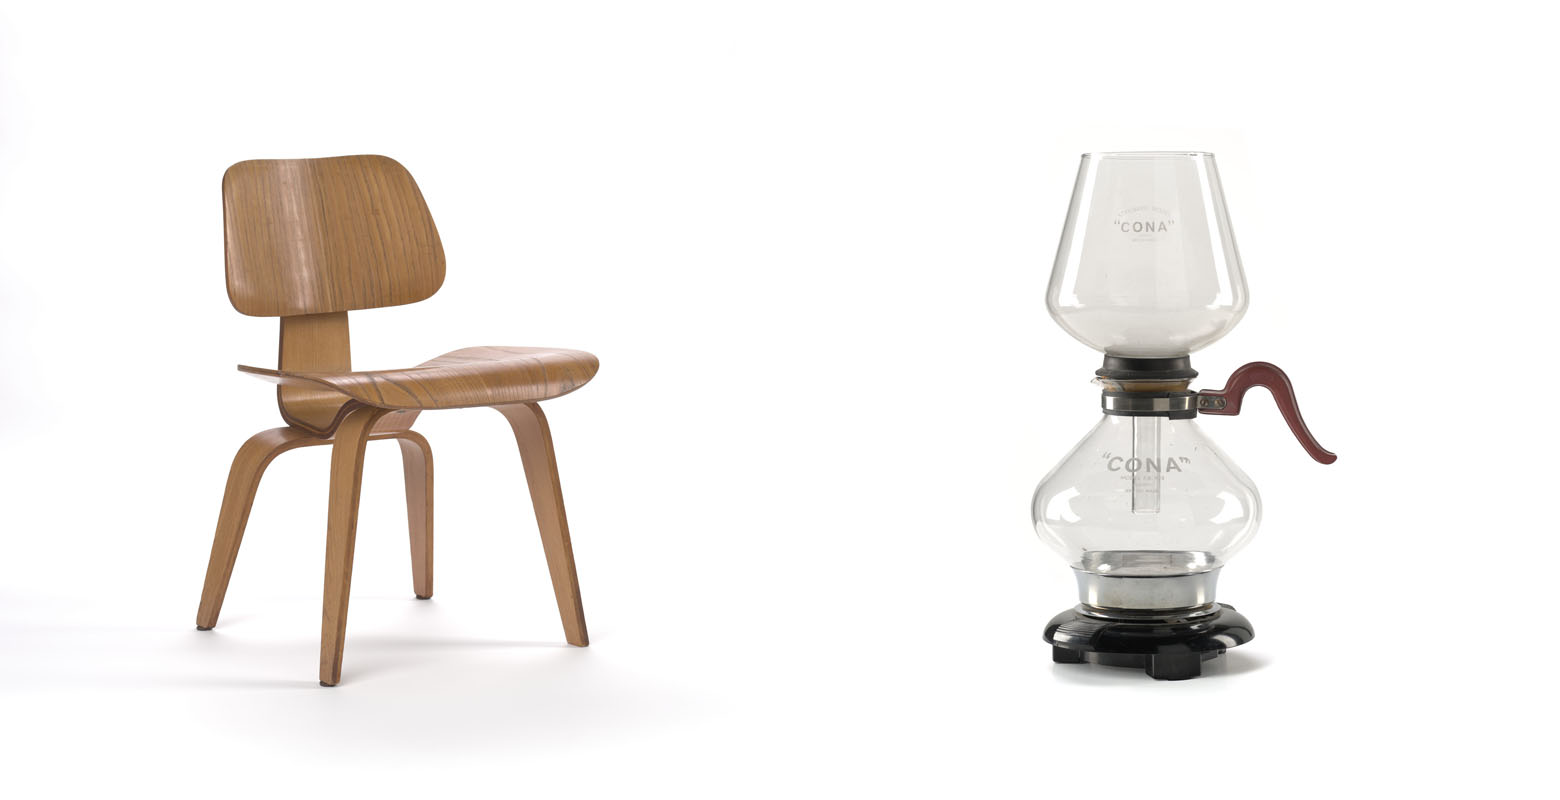 Composite image of a wooden dining chair and glass hourglass-shaped coffee maker